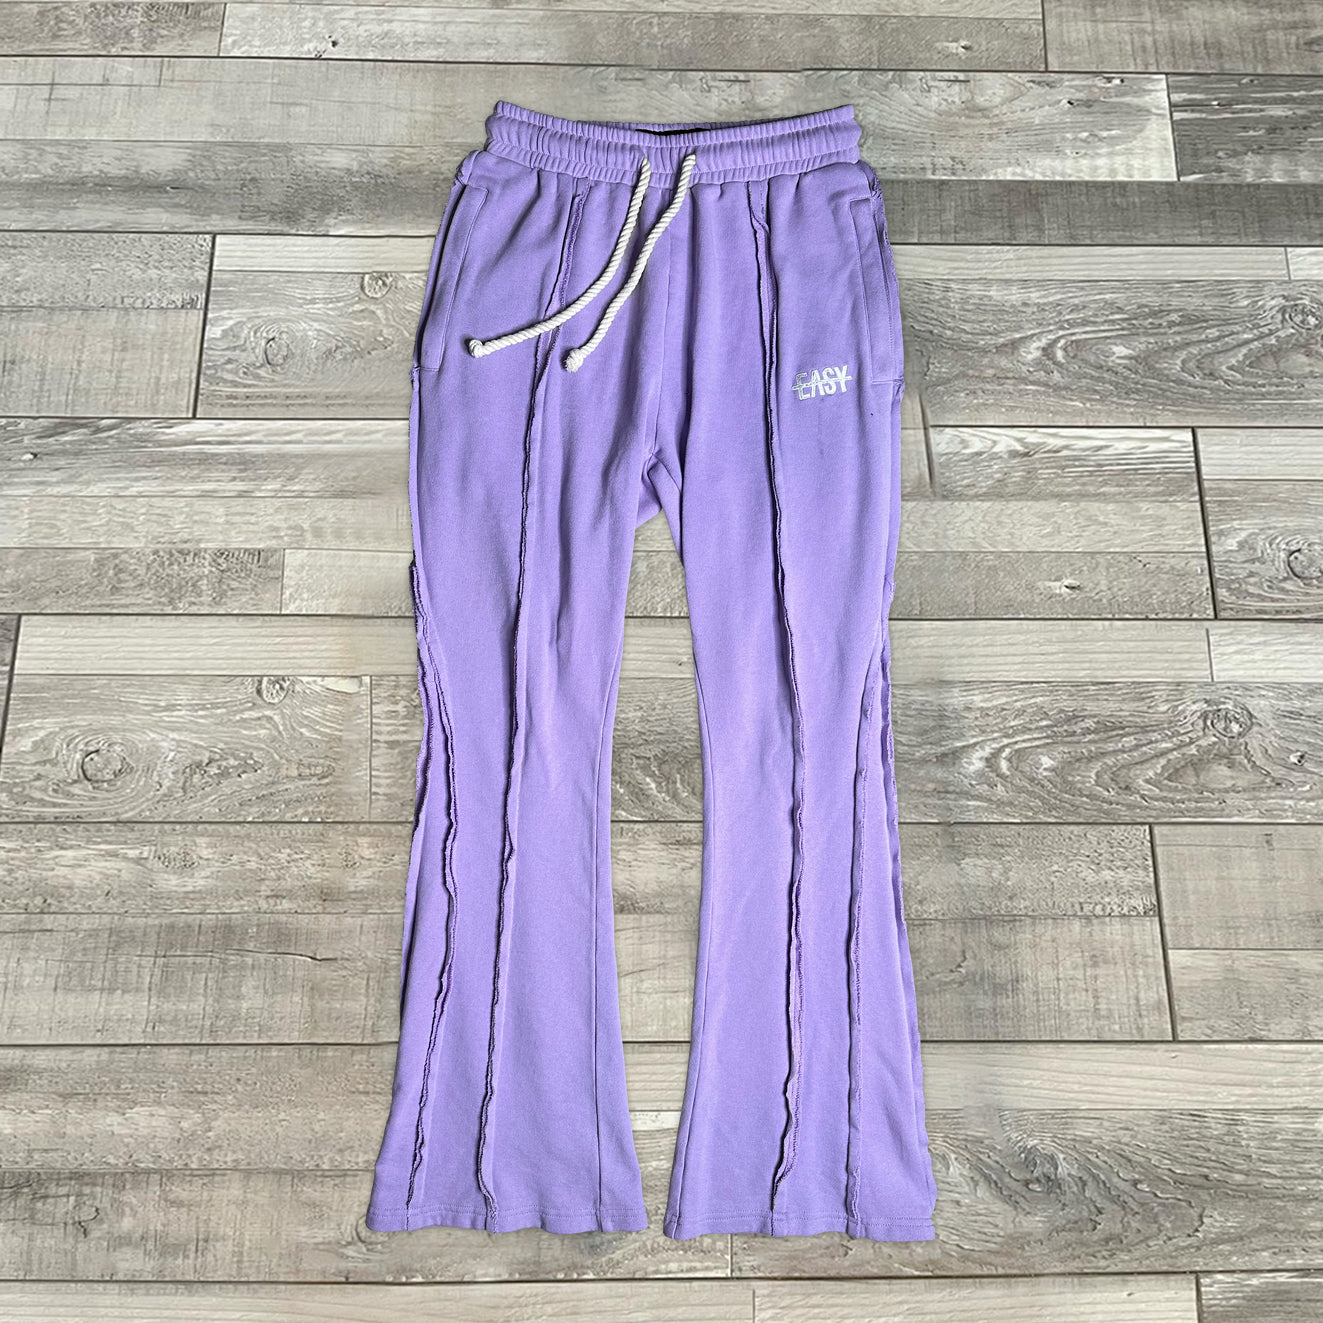 Casual retro paneled trousers